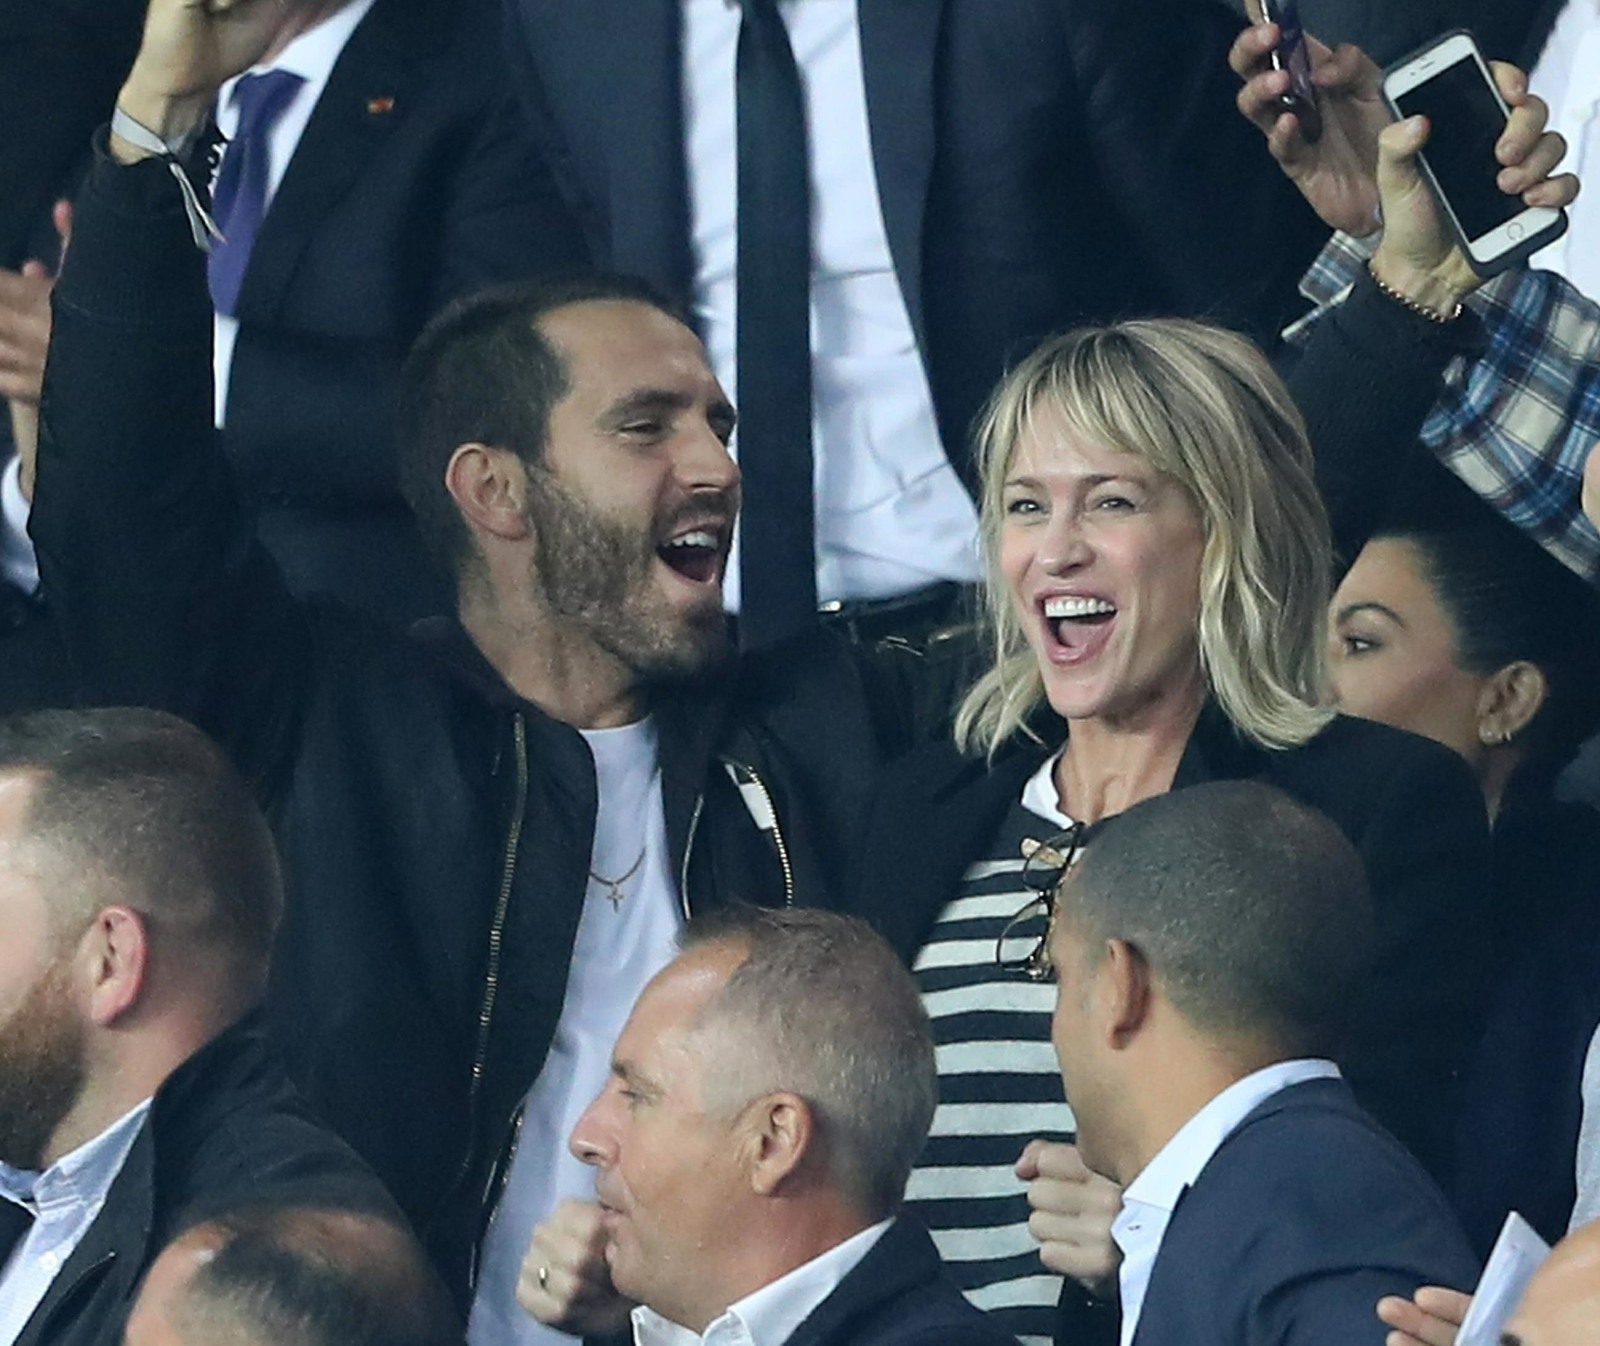 Celebrities attend the Champions League match in Paris